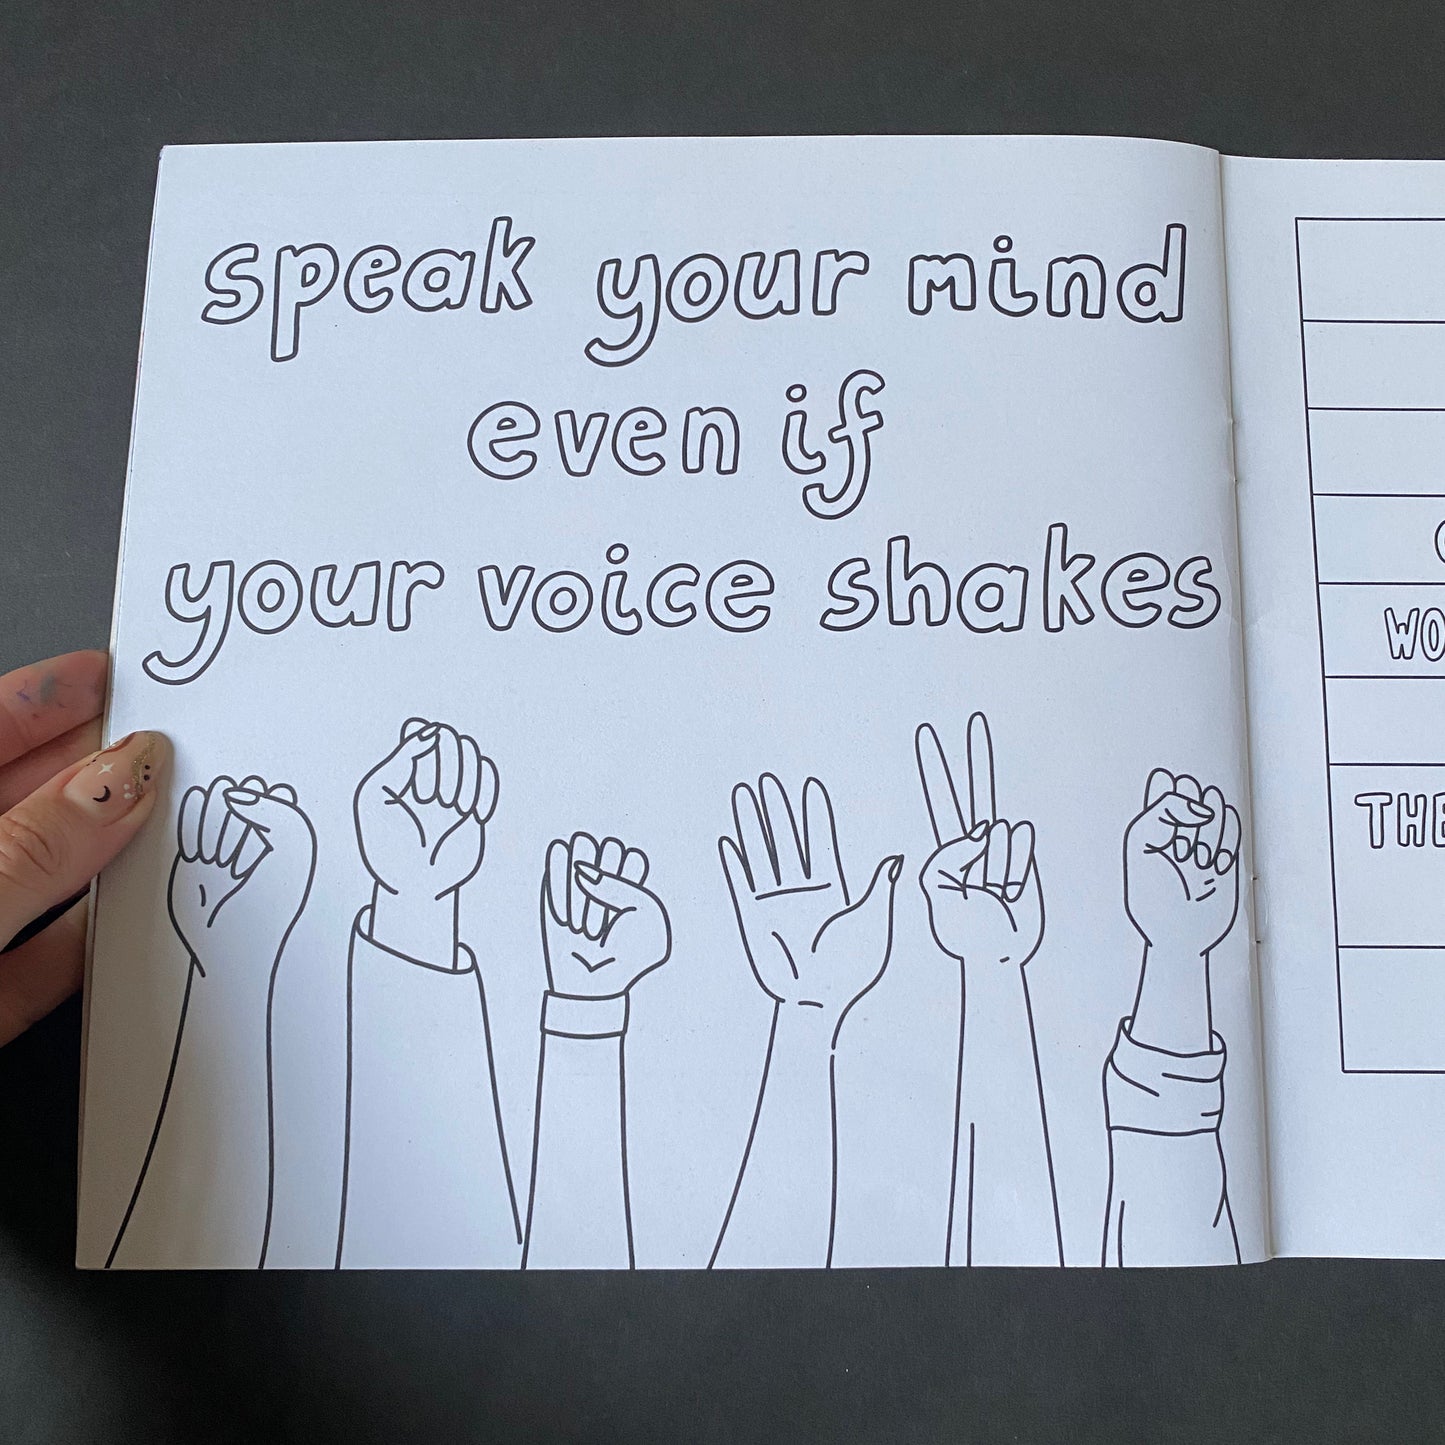 Be Kind to Your Mind Colouring Book